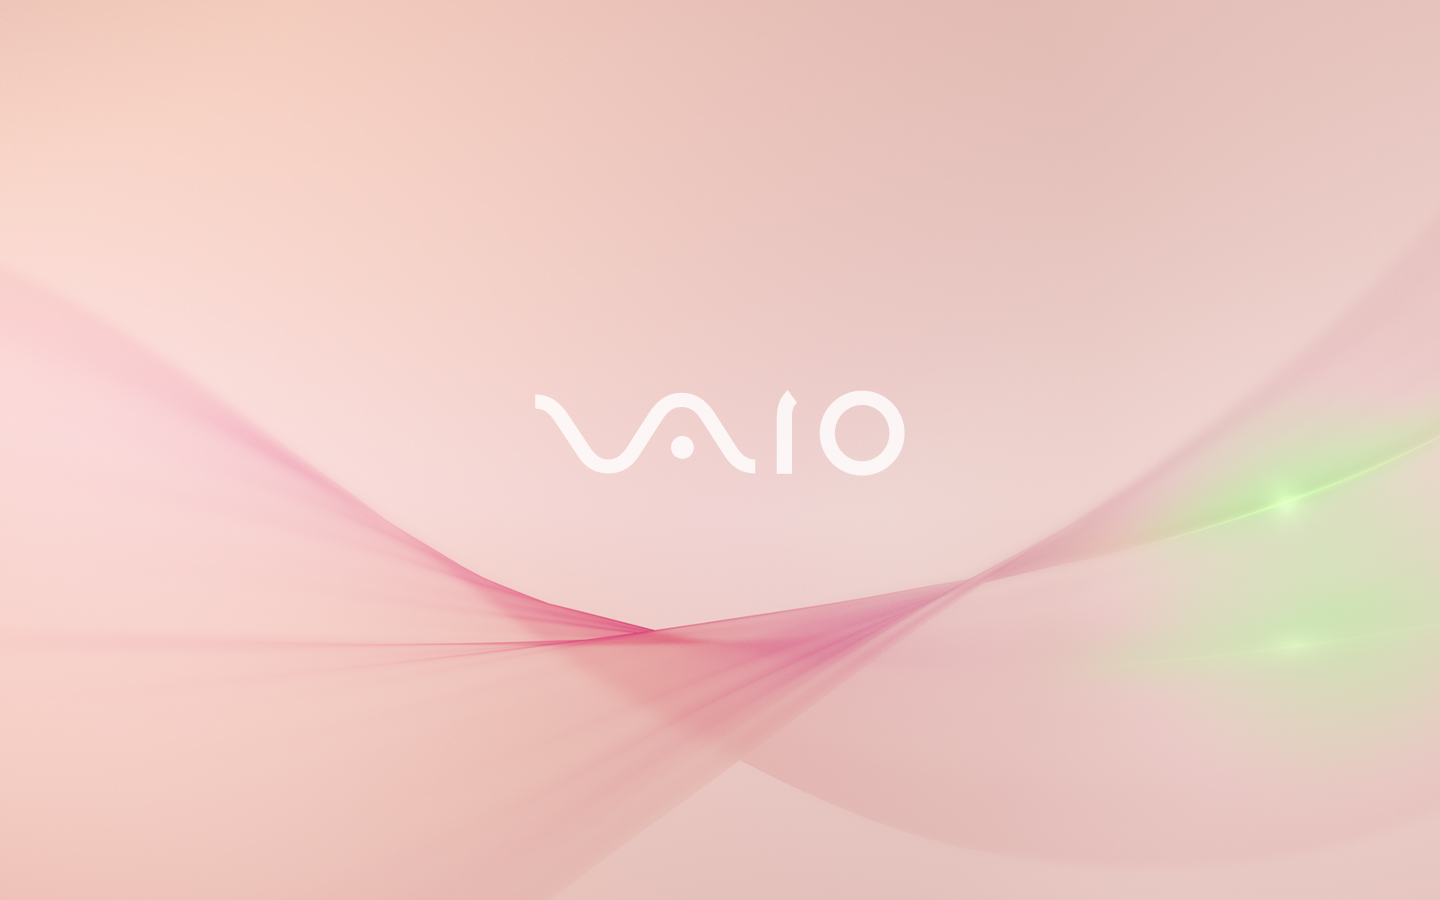 Free Download Laptop Wallpaper Nature Sony Vaio Pink Laptop Wallpaper 1440x900 For Your Desktop Mobile Tablet Explore 50 Wallpaper For Laptops And Notebook Wallpaper For Notebook Laptop Free